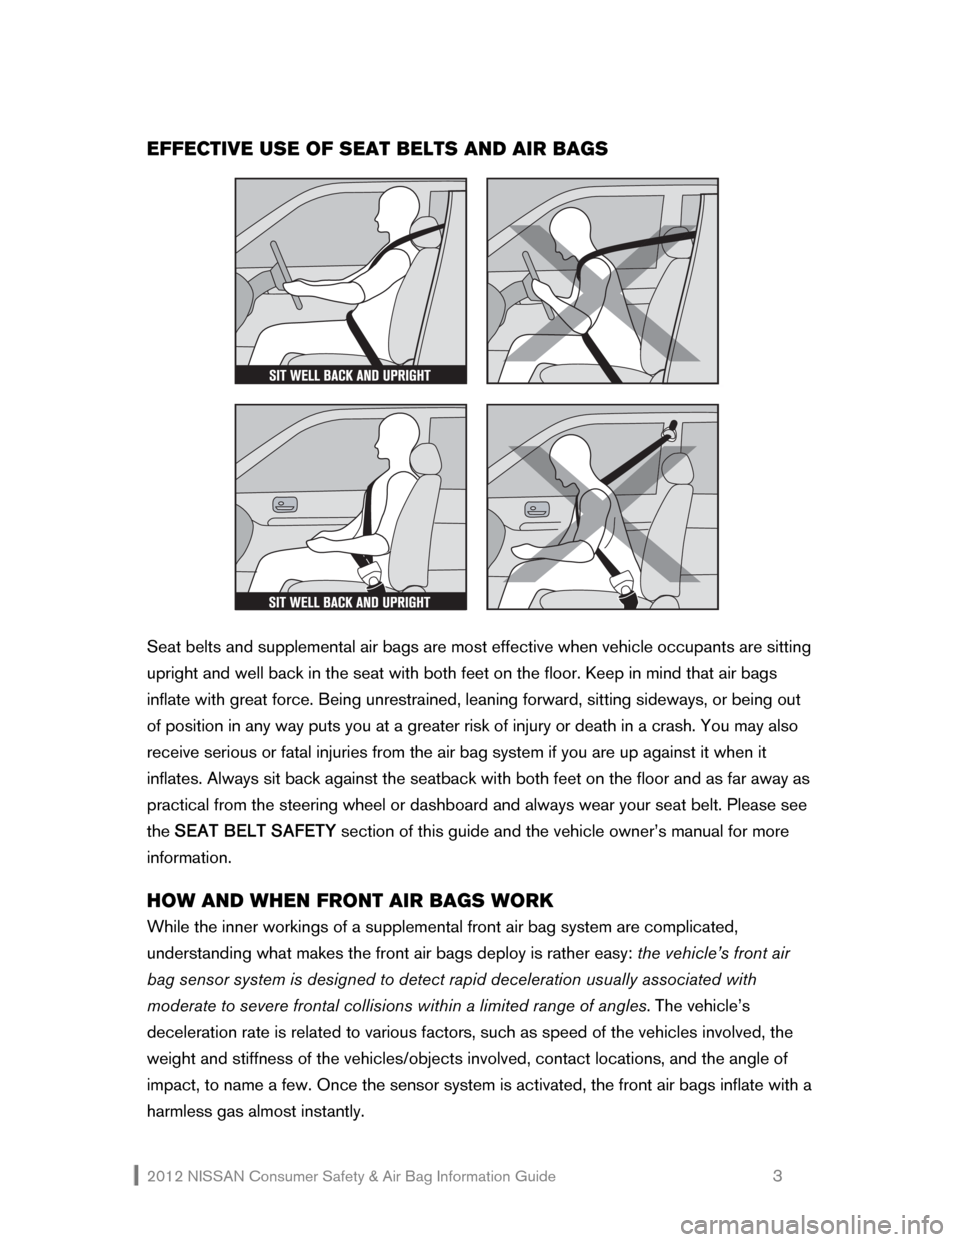 NISSAN PATHFINDER 2012 R52 / 4.G Consumer Safety Air Bag Information Guide 2012 NISSAN Consumer Safety & Air Bag Information Guide                                                   3 
EFFECTIVE USE OF SEAT BELTS AND AIR BAGS 
 
 
 
Seat belts and supplemental air bags are mo